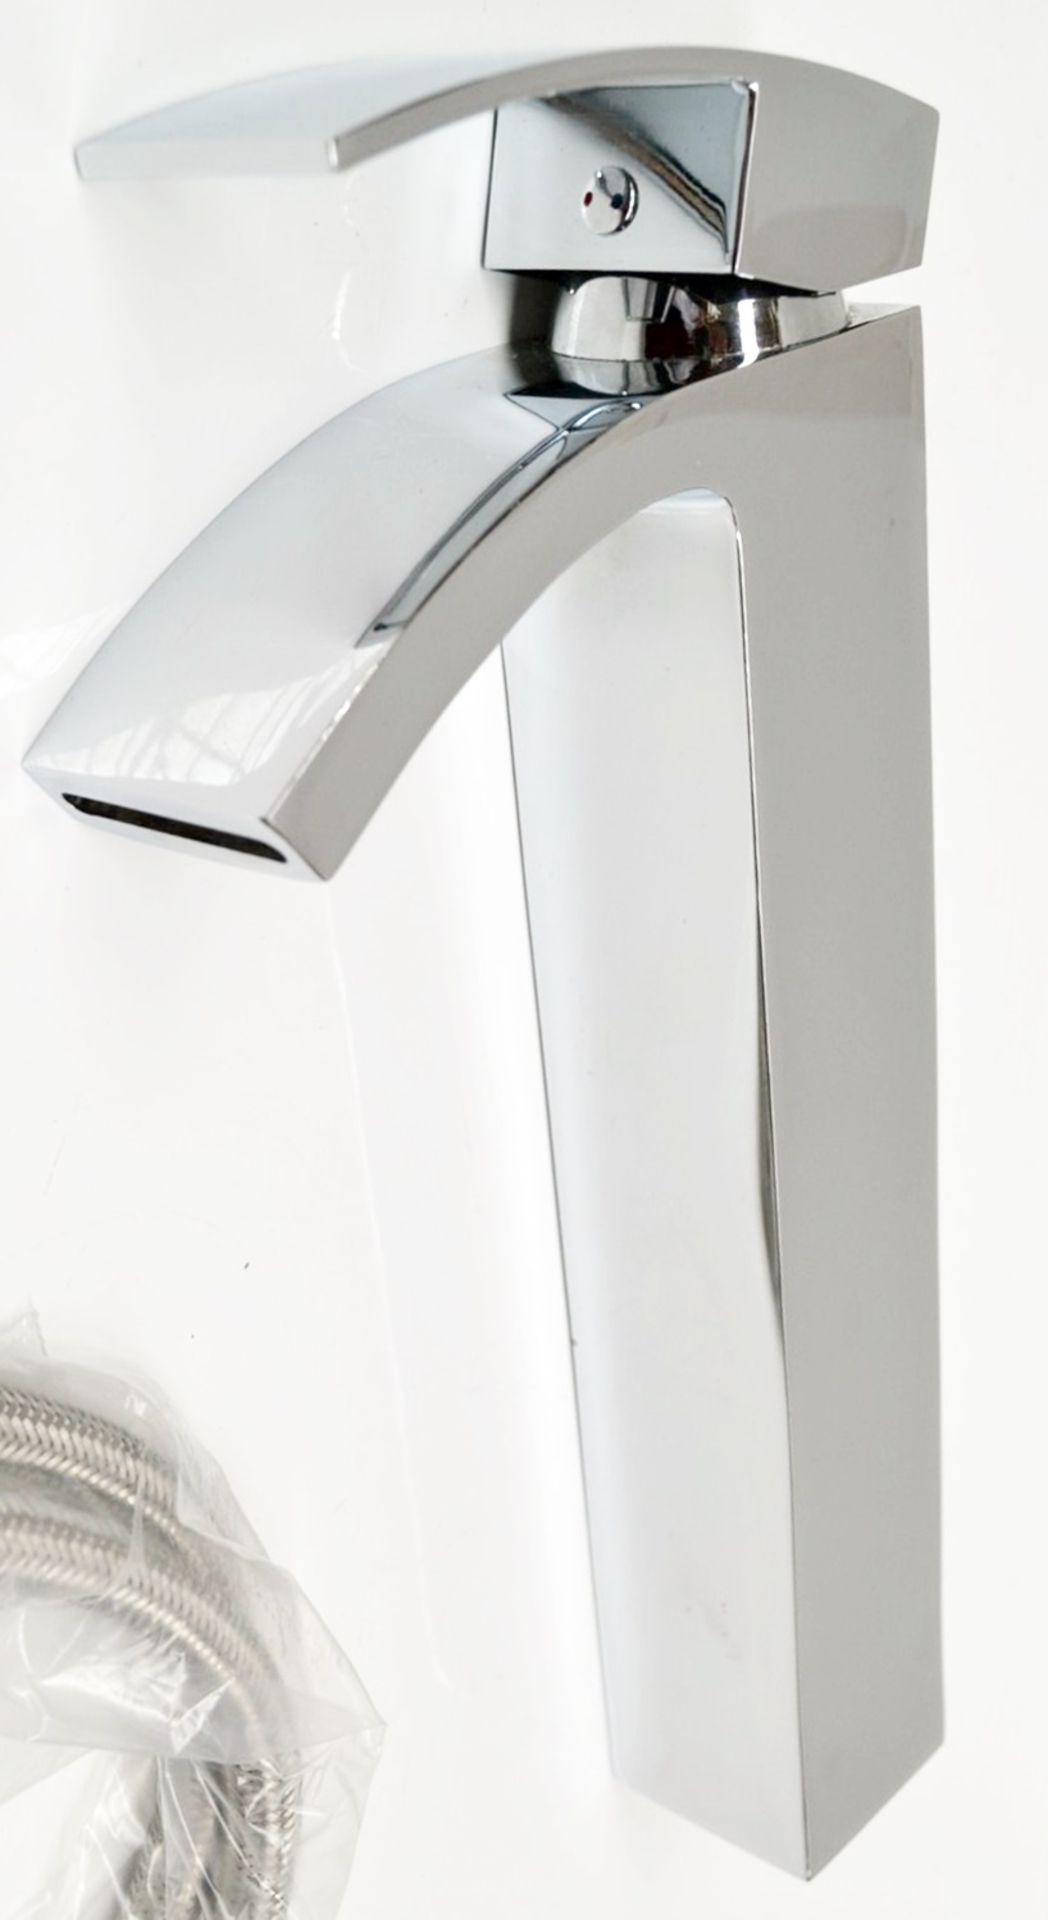 1 x CENTURY Basin Mixer Tap - Made From Solid Brass And Dipped In Chrome For A Seamless Finish -